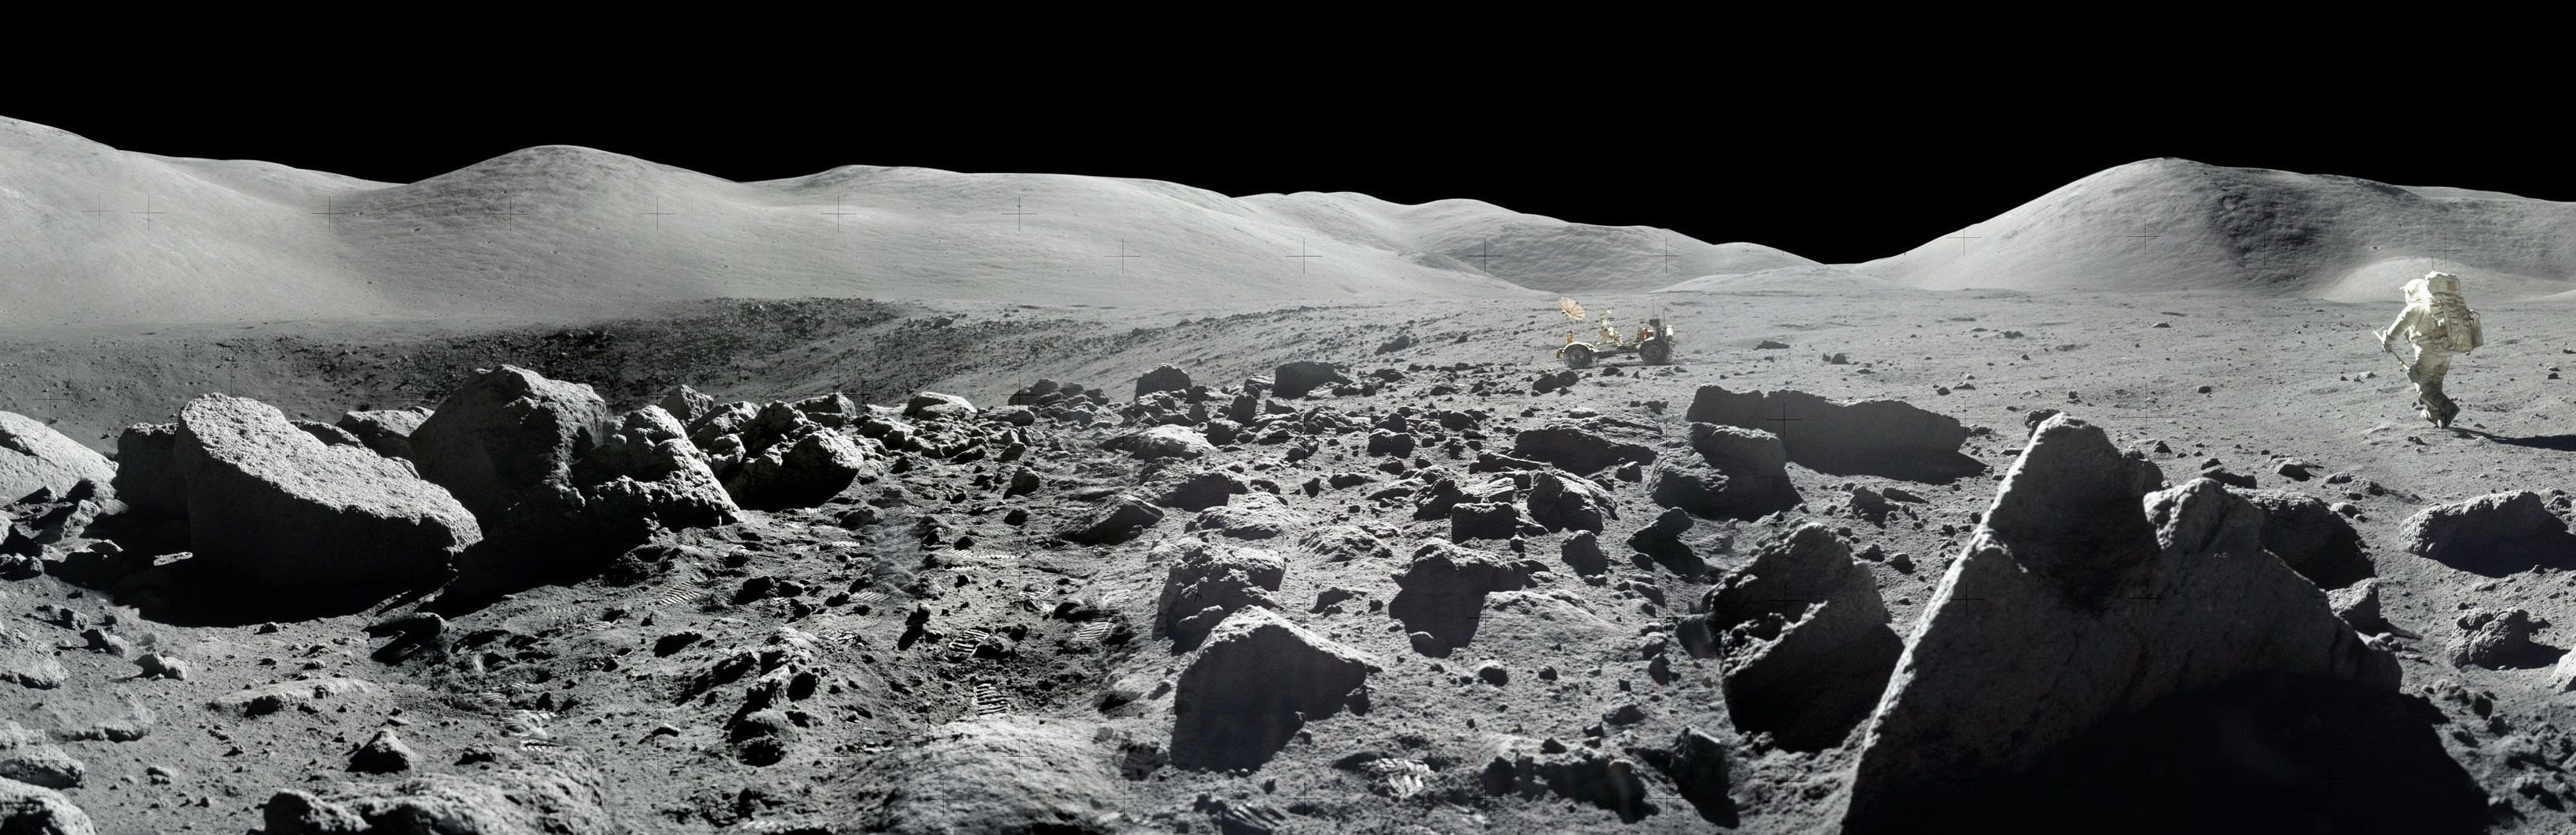 Apollo 11 moon landing – Nasa reveals stunning NEW photos from lunar surface to celebrate mission's 50th anniversary